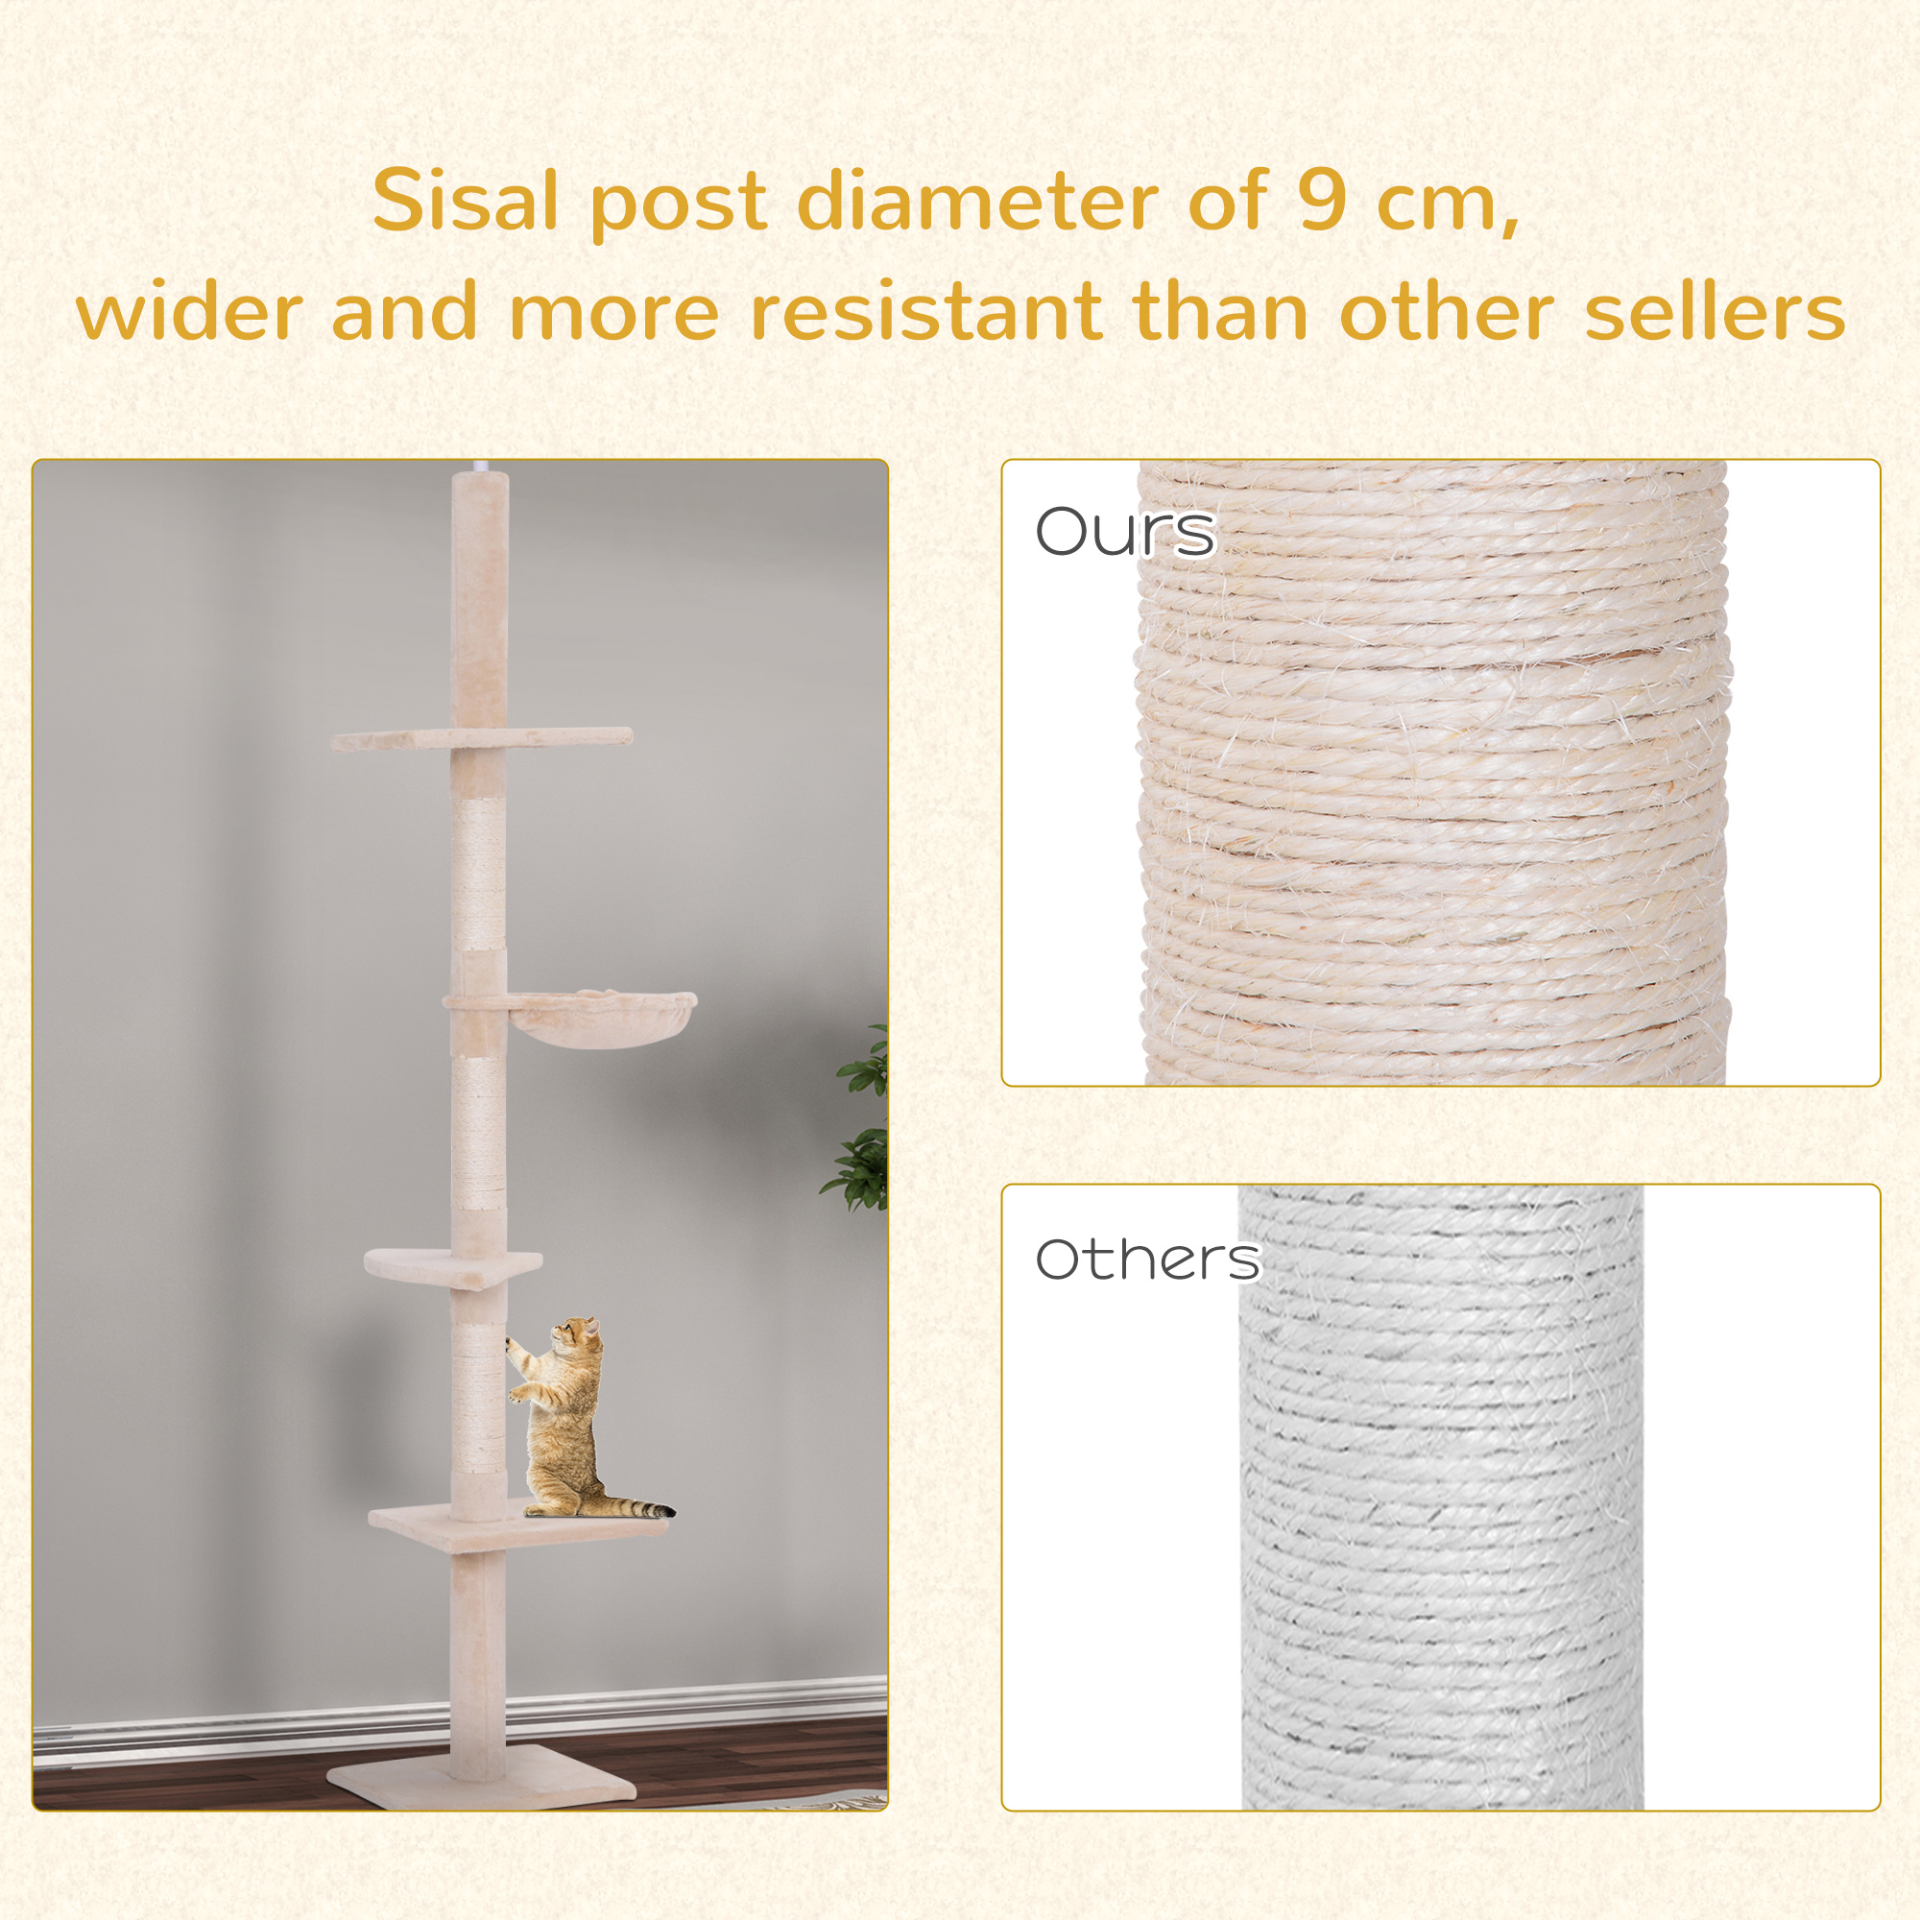 PawHut Floor to Ceiling Cat Tree for Indoor Cats 5-Tier Kitty Tower Climbing Activity Center Scratching Post Adjustable Height 230-260cm Beige